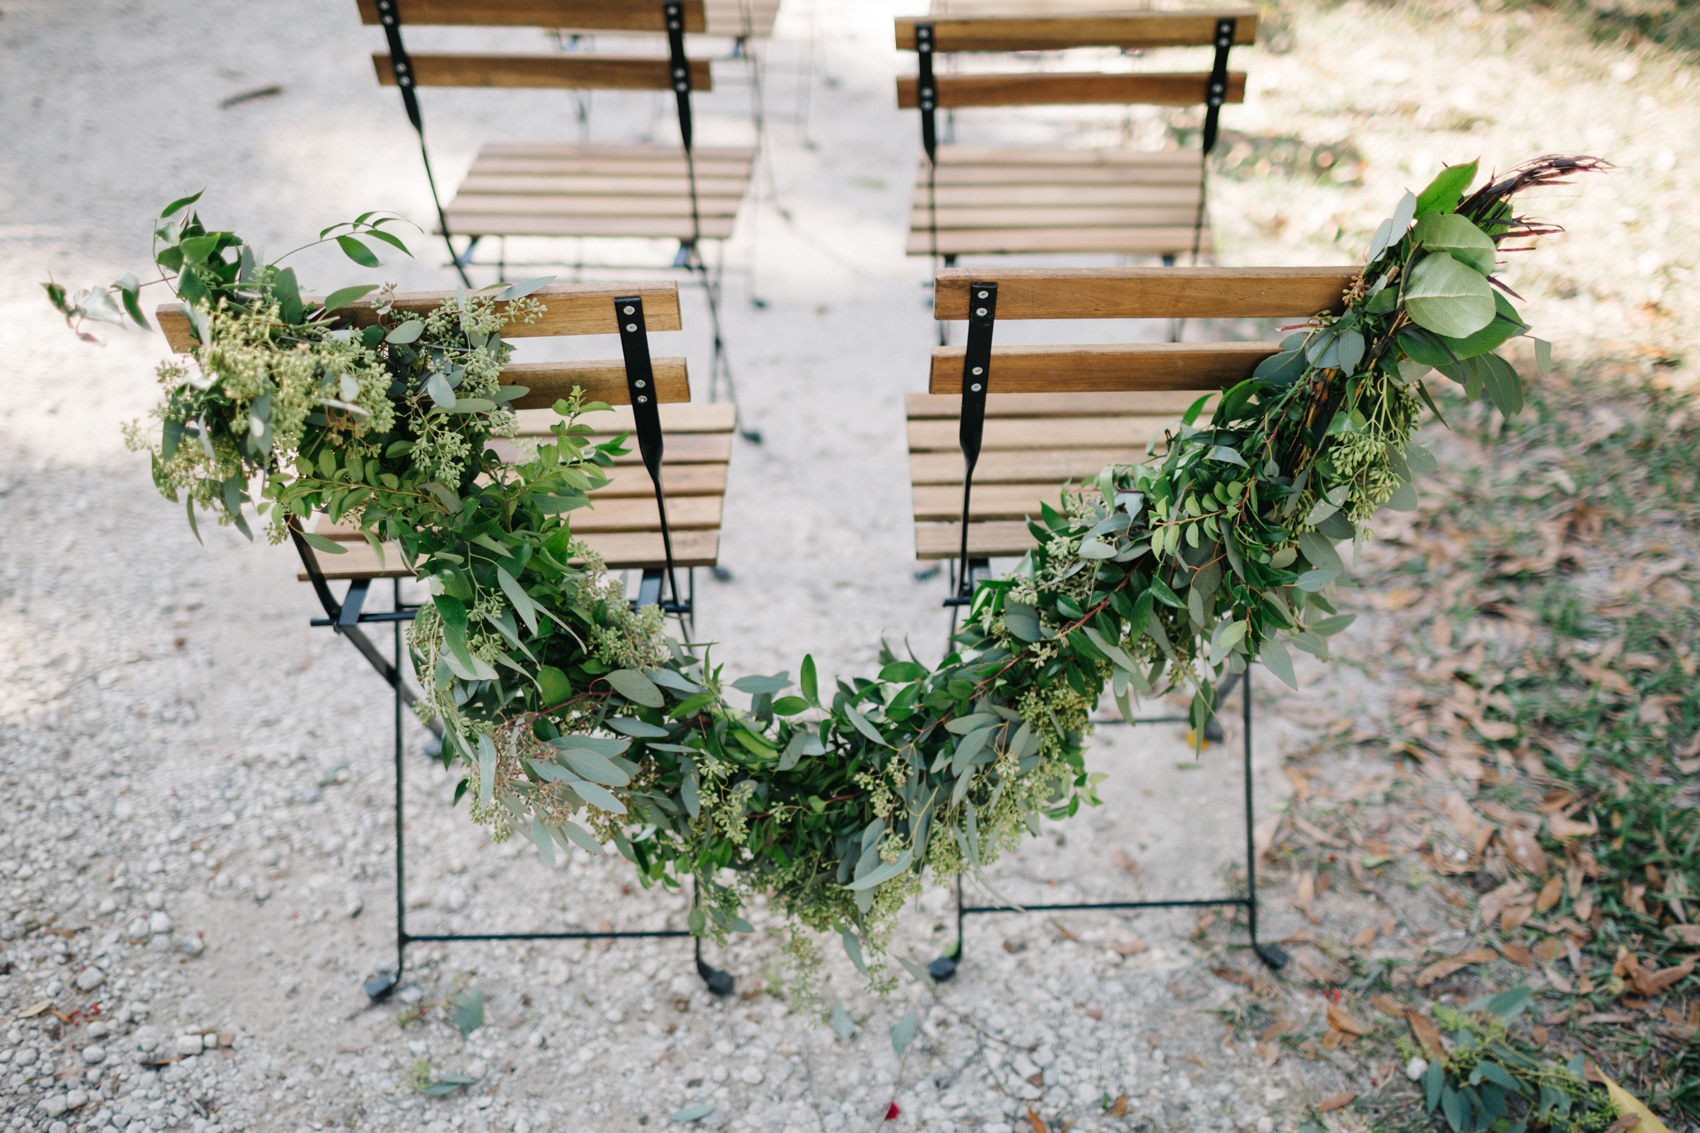 a garland of greenery around the ceremony chairs